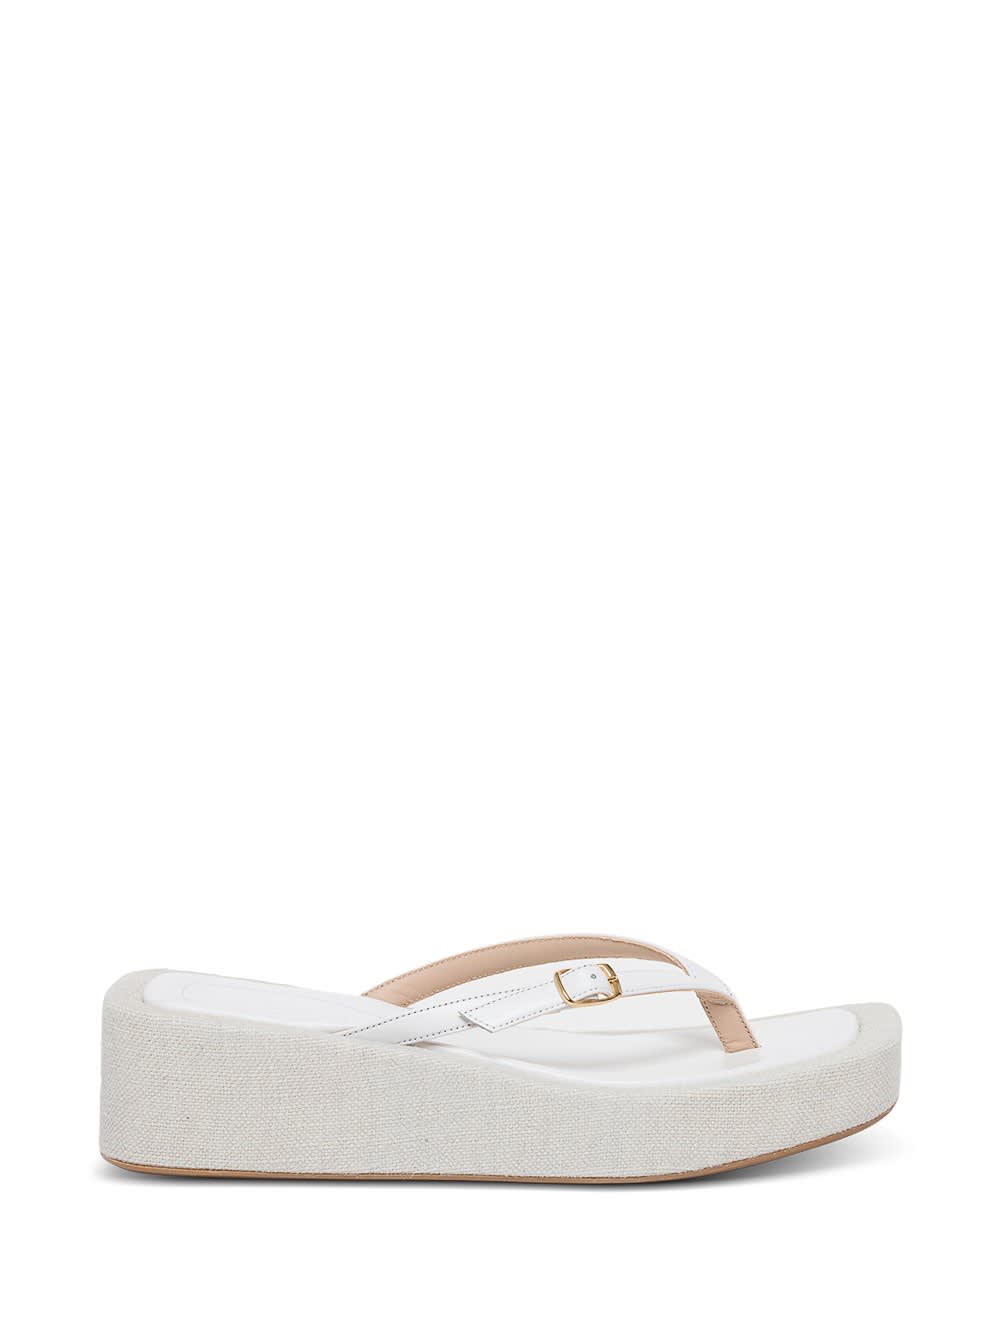 Jacquemus Les Tatanes Lin Sandals In White Leather